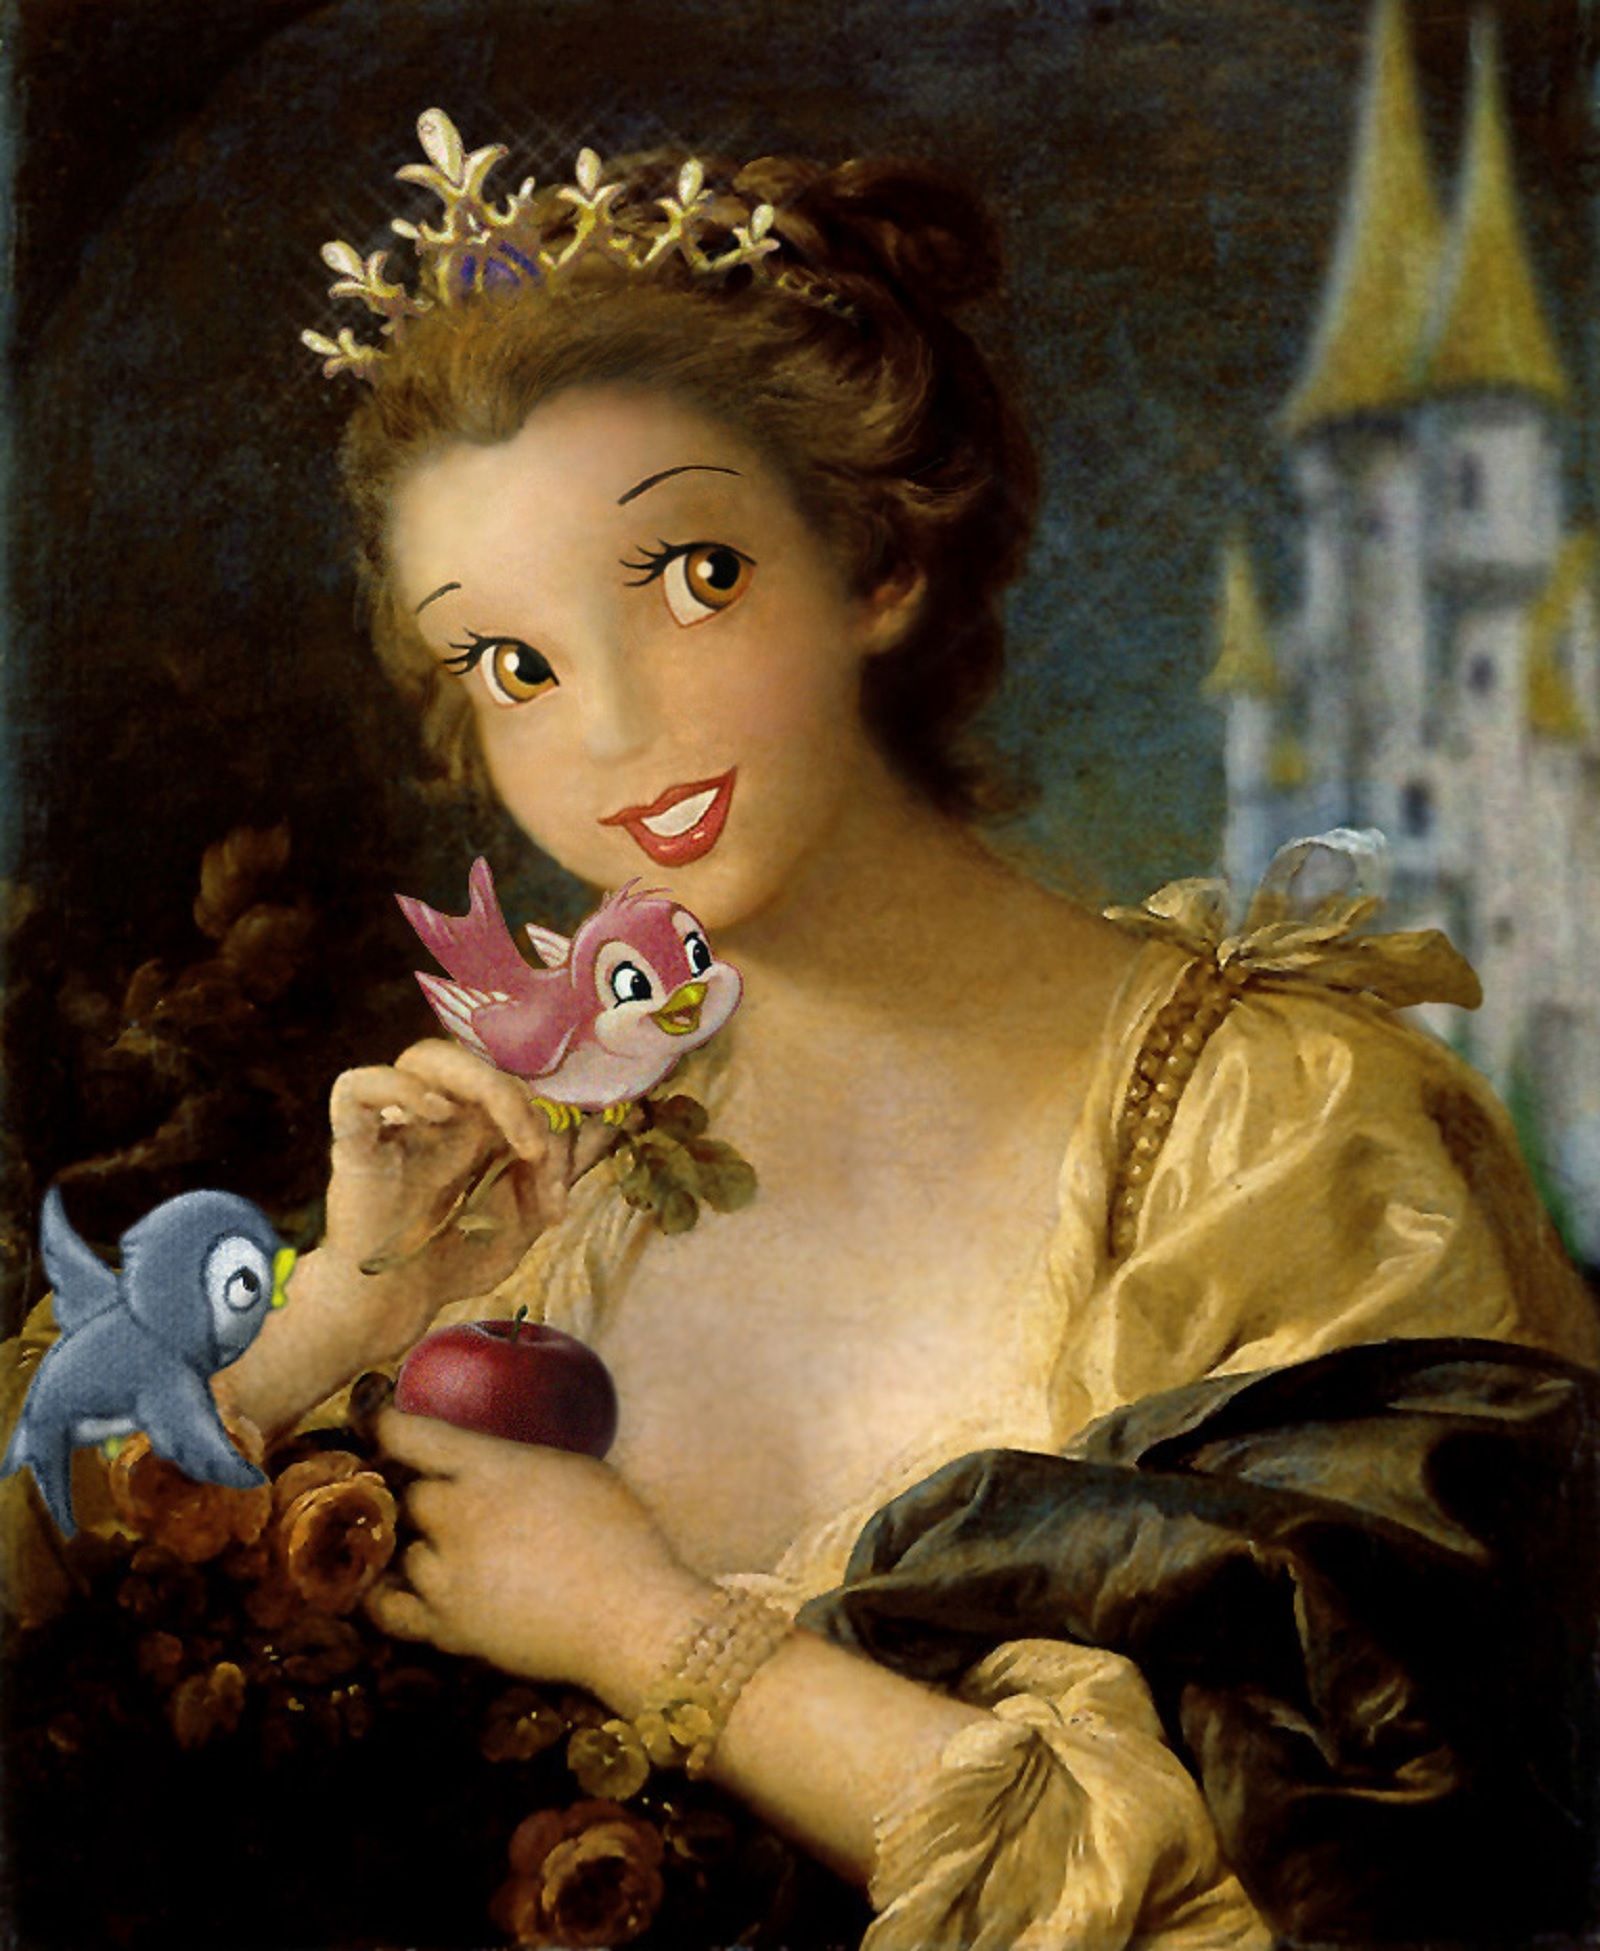 Amusing Images Of Cartoon Characters In Photoshopped Into Renaissance Paintings photo 2